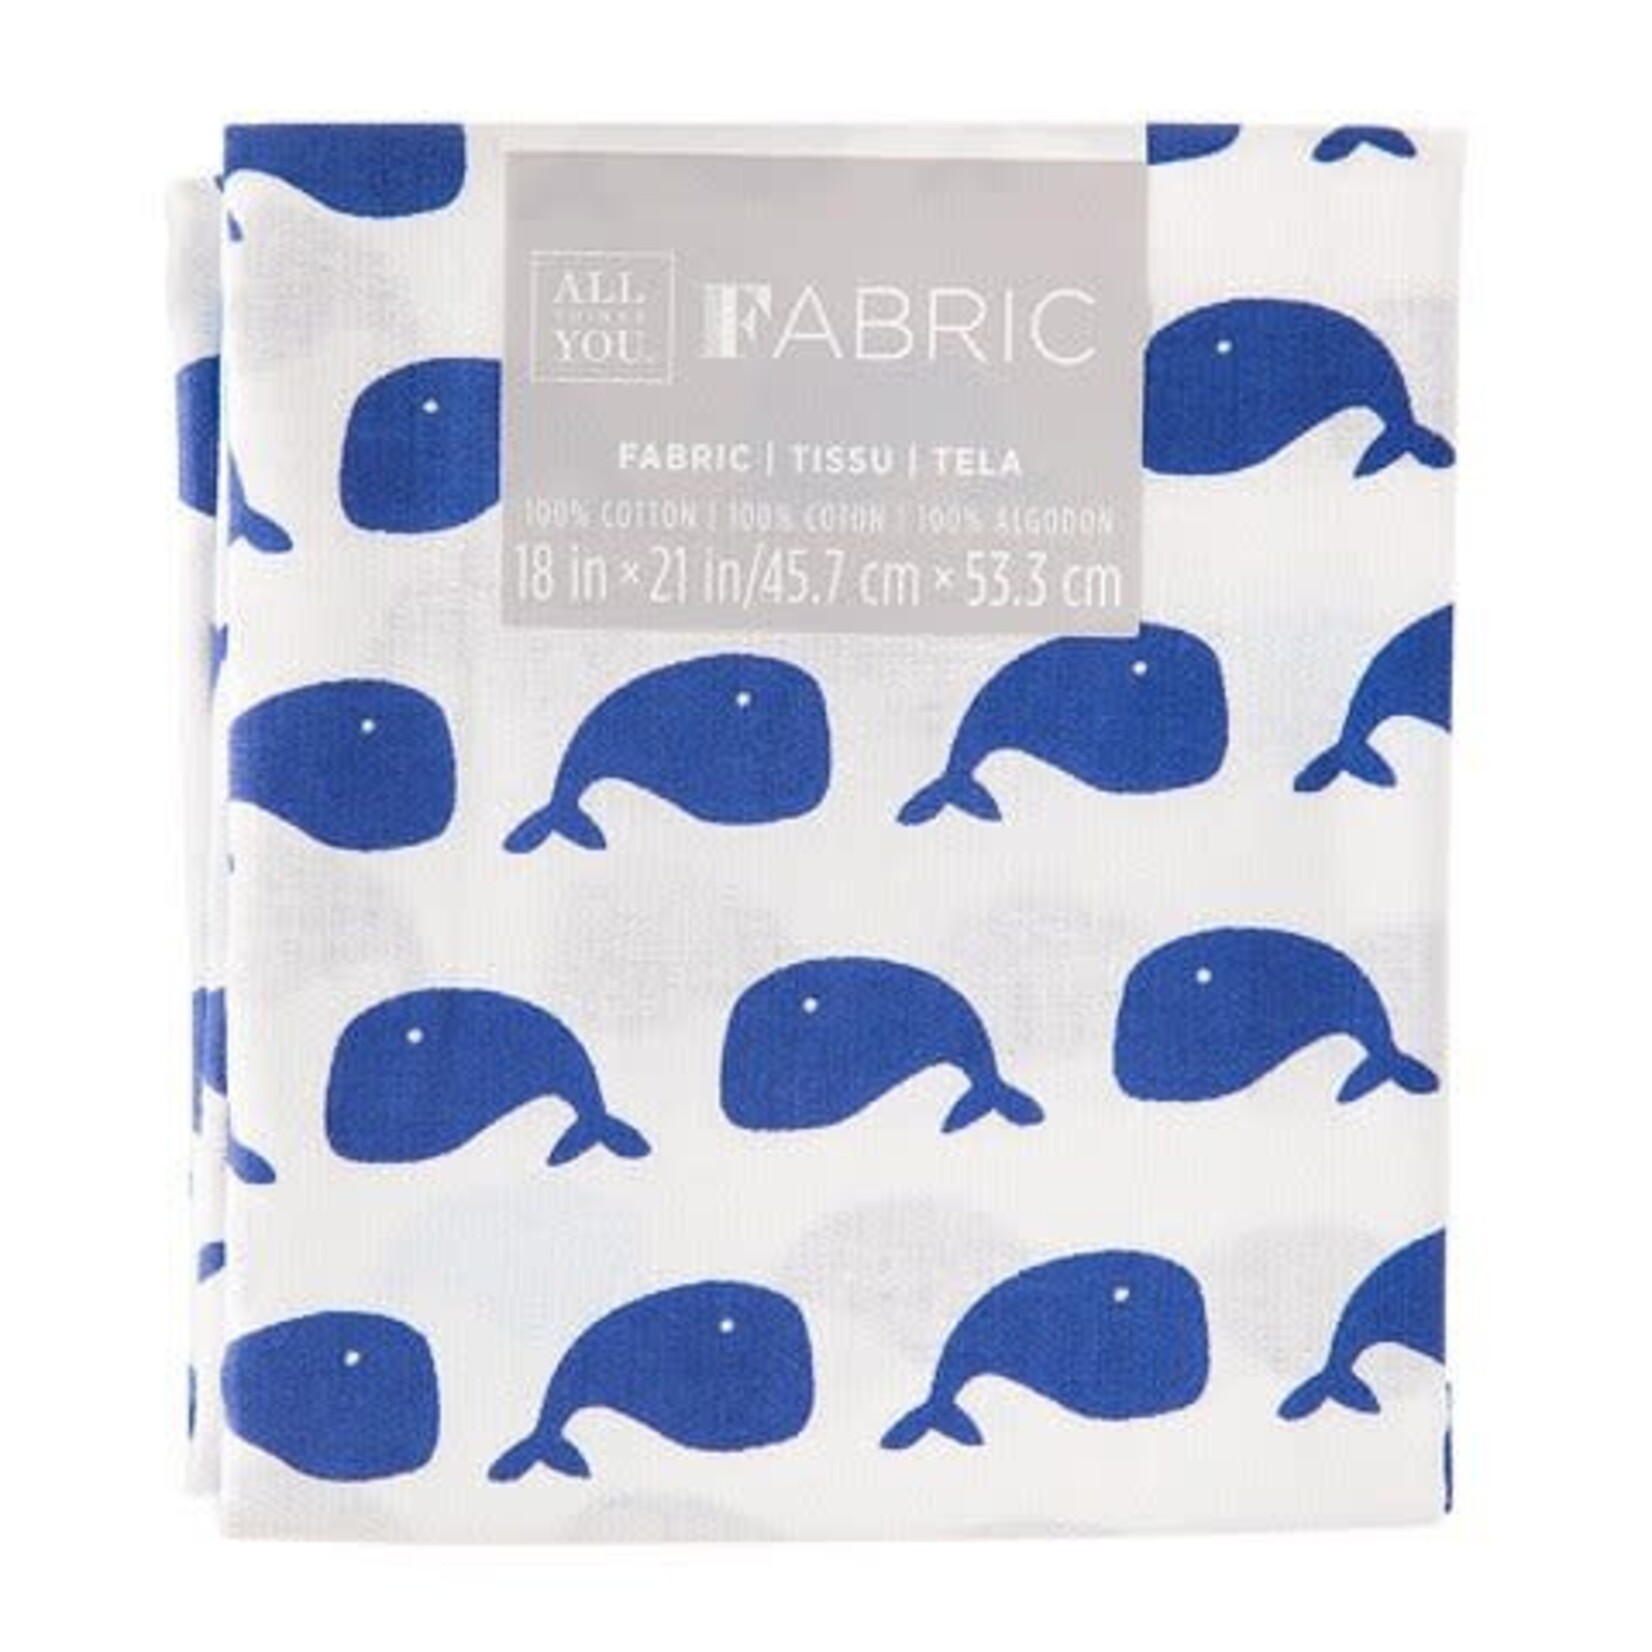 Darice Patterned Quilting Fabric Fat Quarters: Blue Whales, 18 X 21 Inches